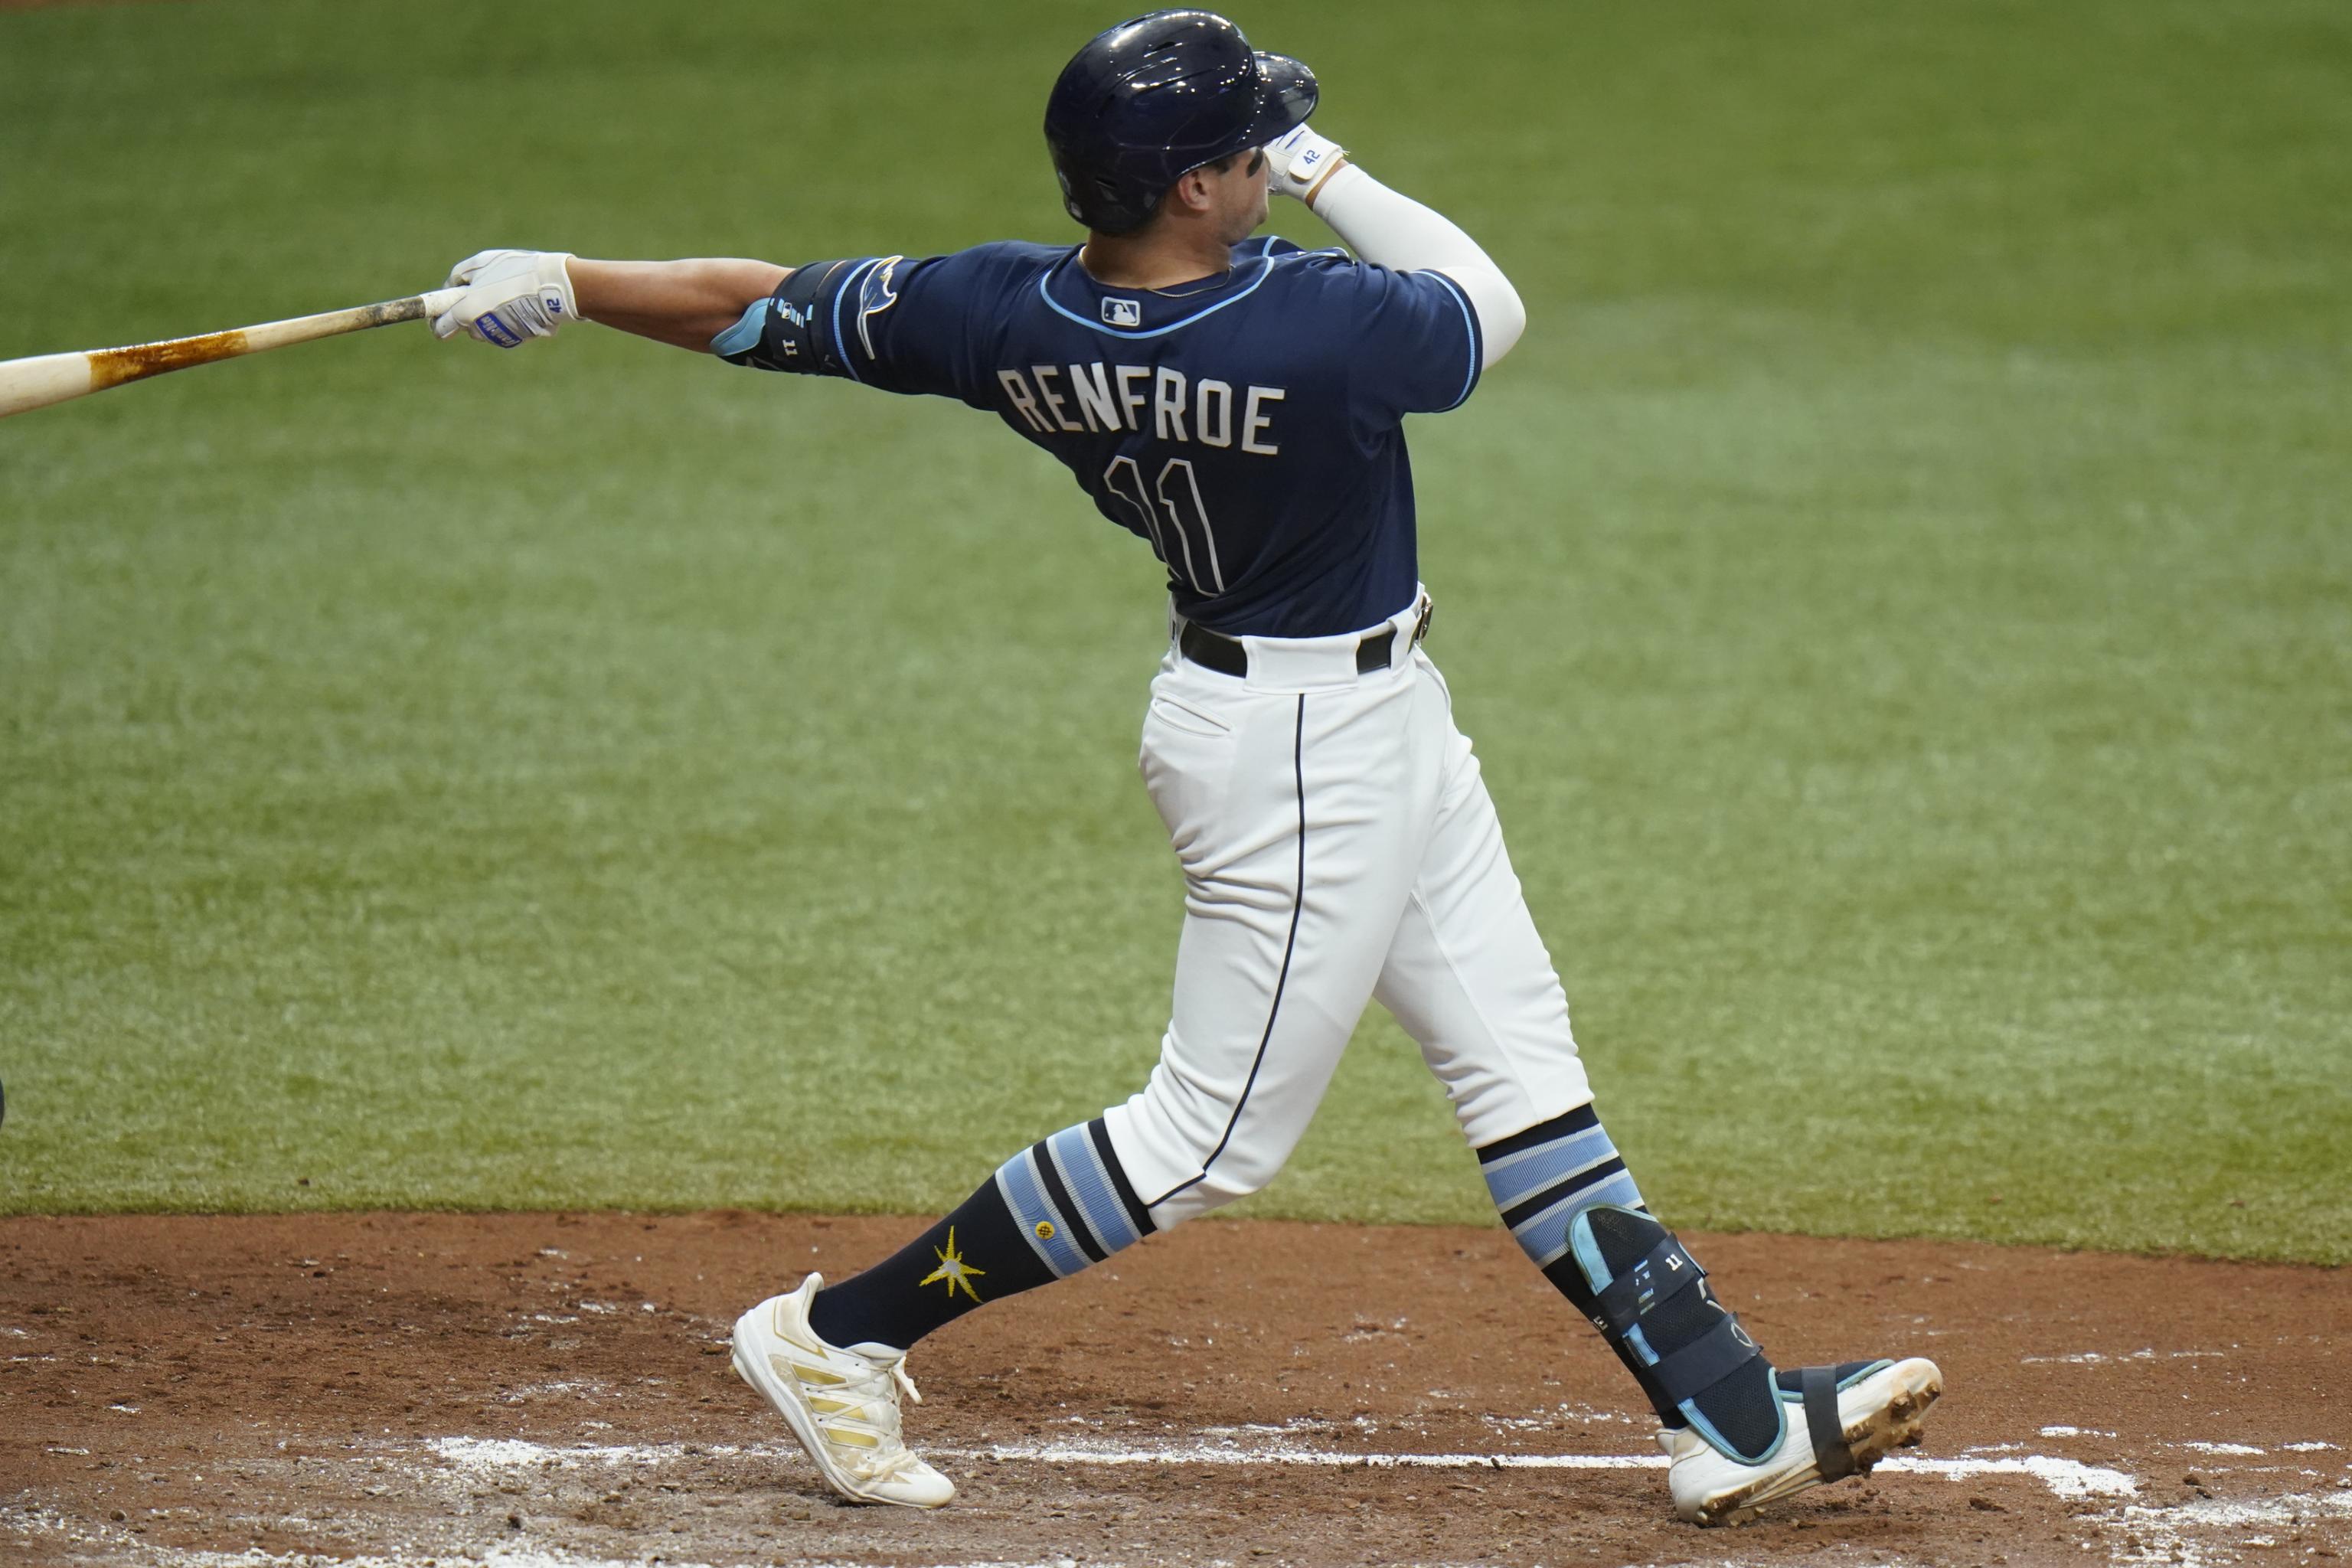 Rays expected to trade Tommy Pham, acquire Hunter Renfroe from